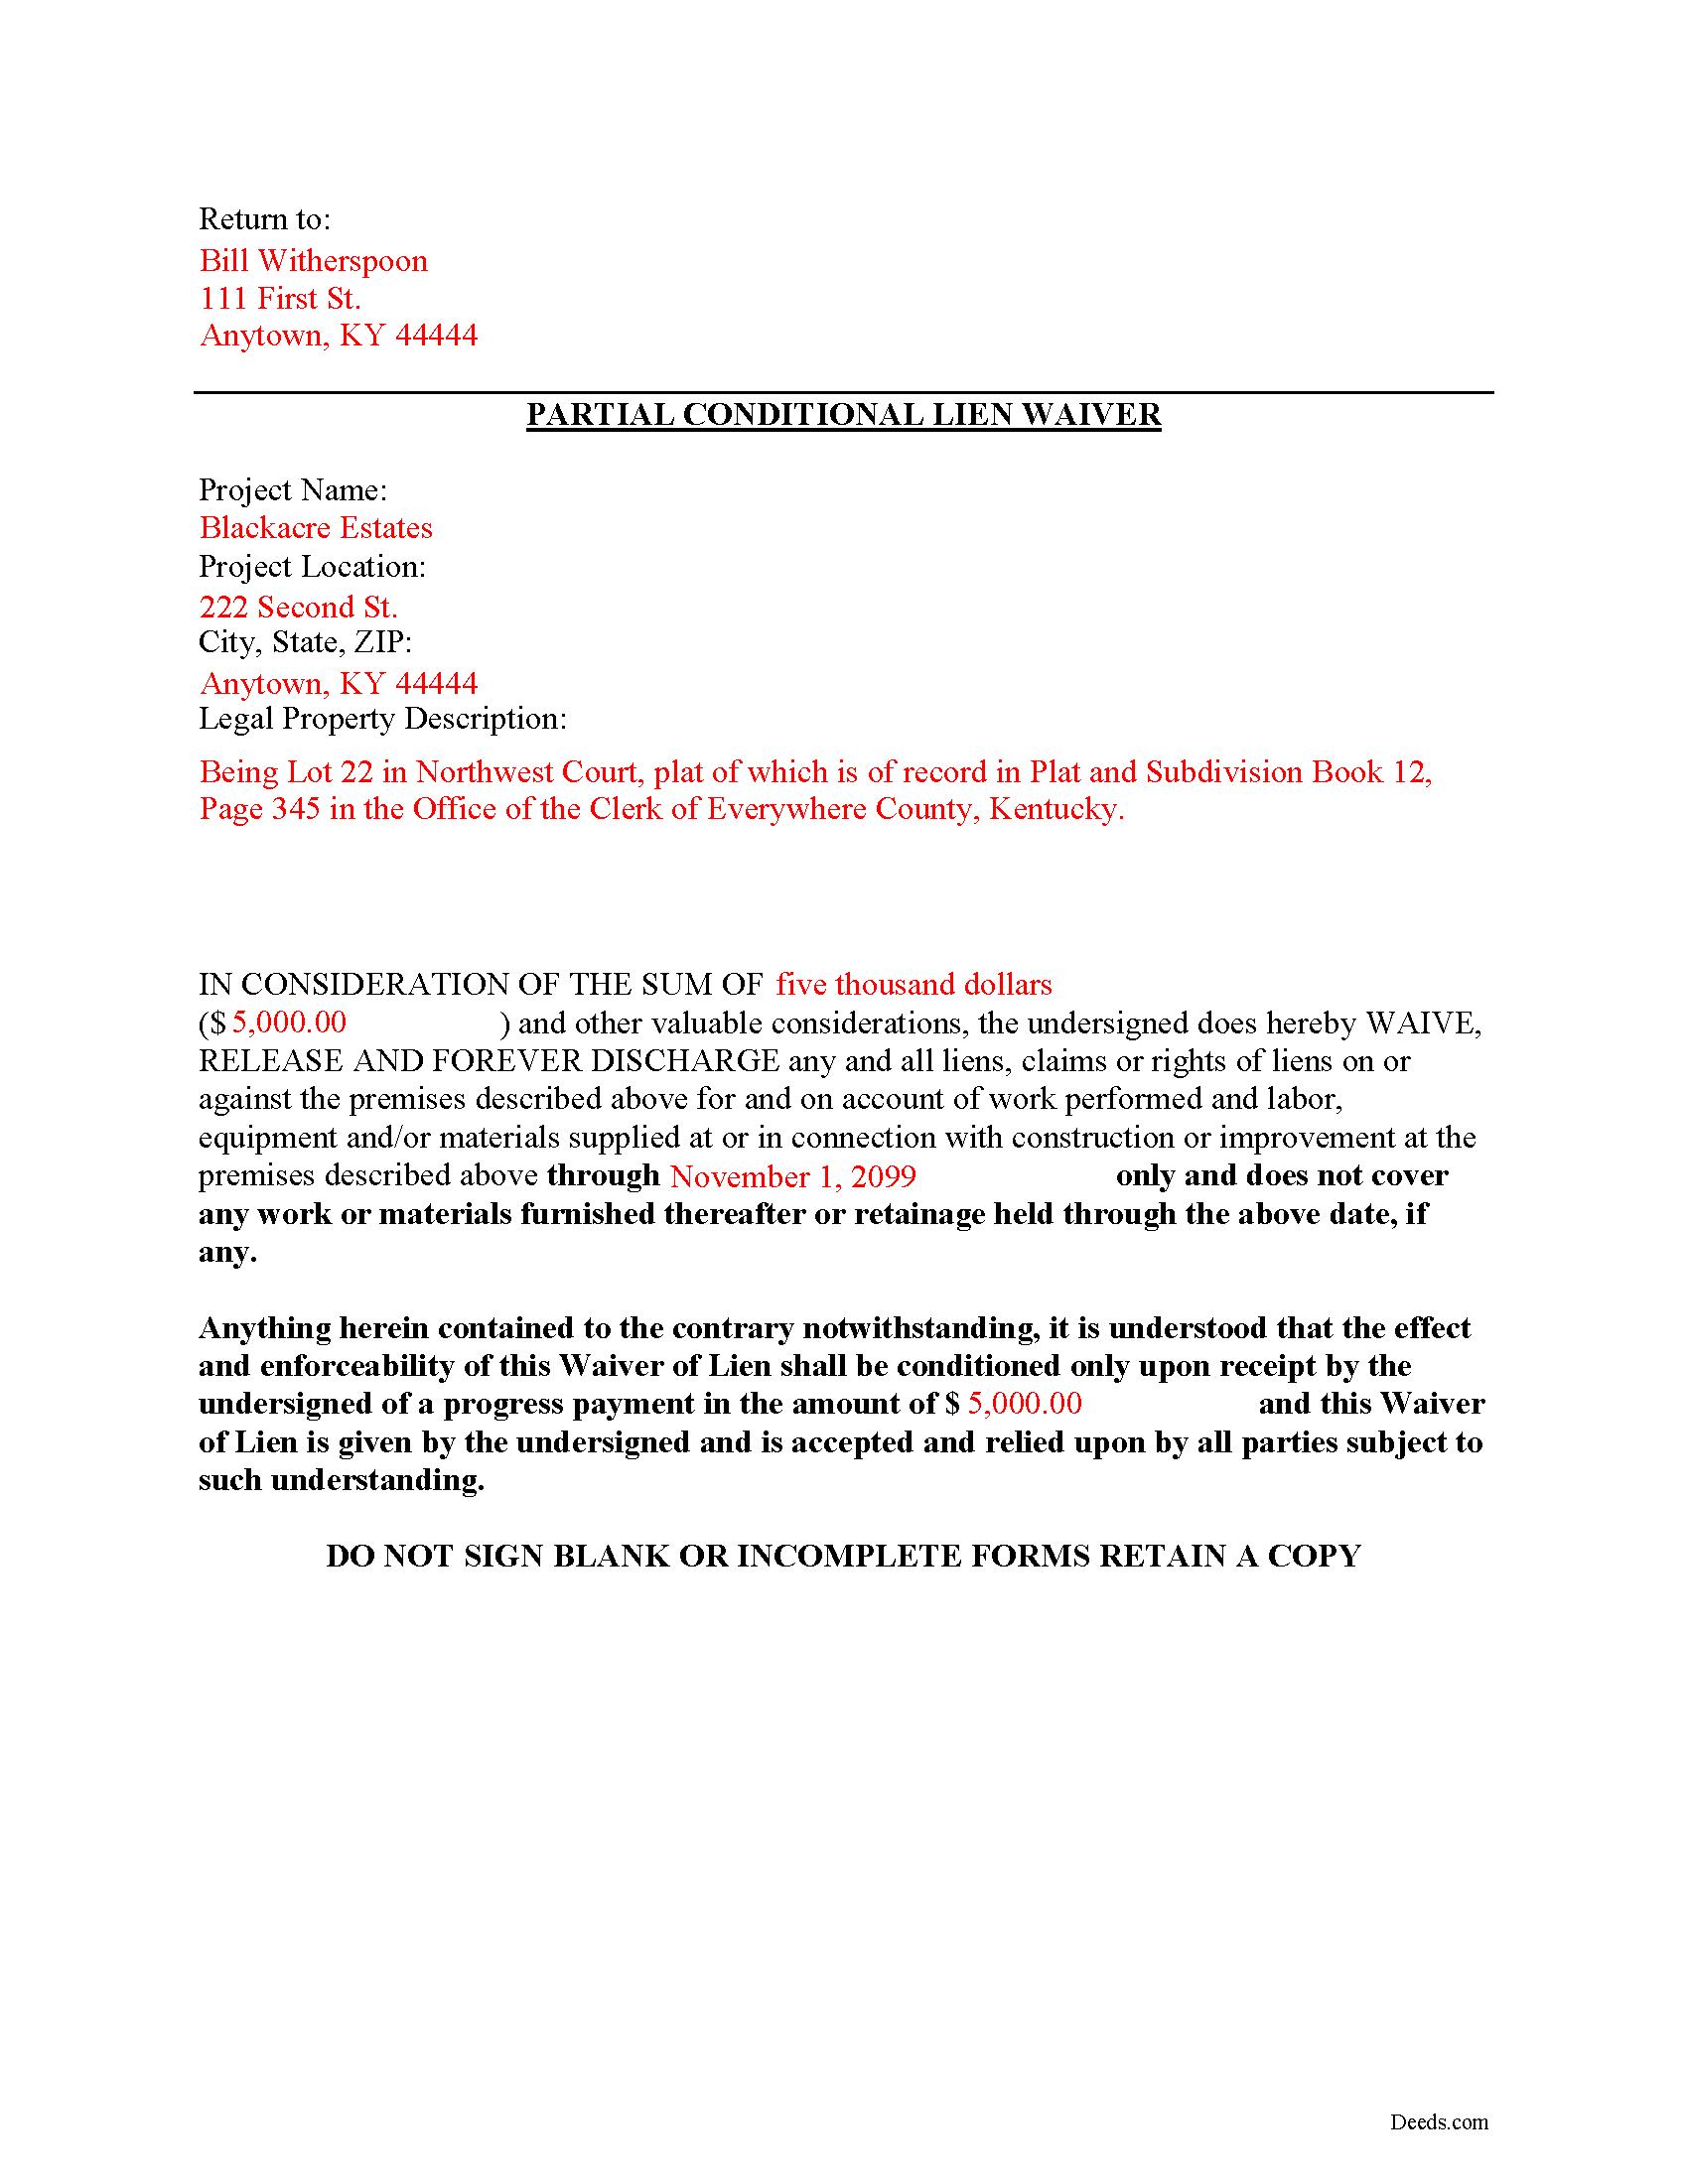 Completed Example of the Partial Conditional Lien Waiver Document